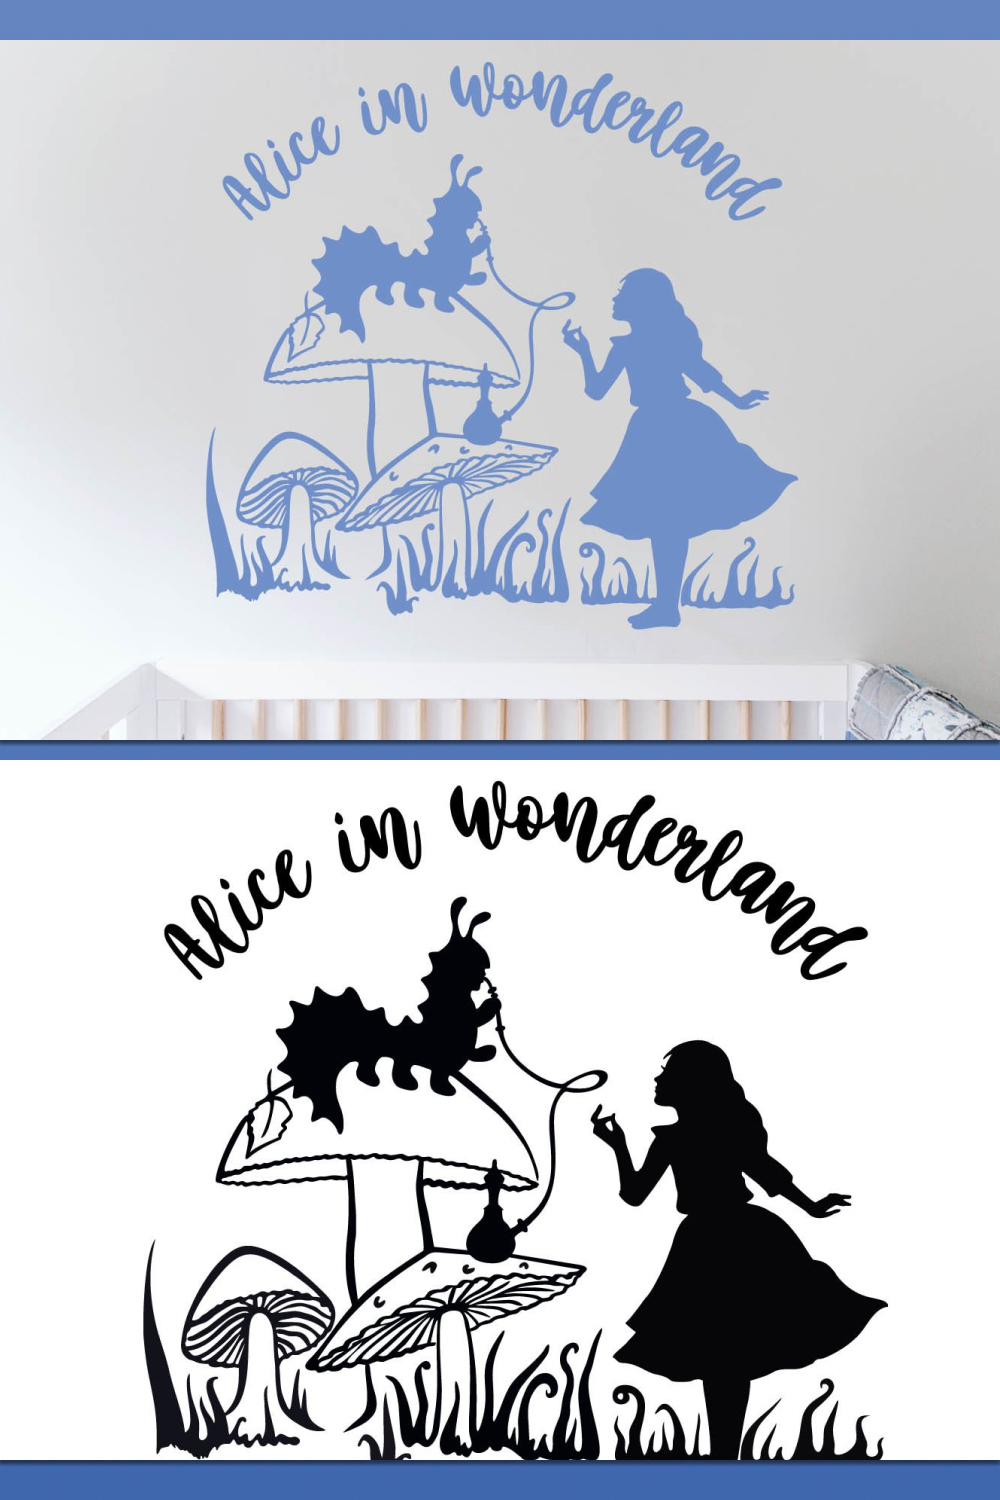 A preview of images in a blue style on the theme of a fairy tale.